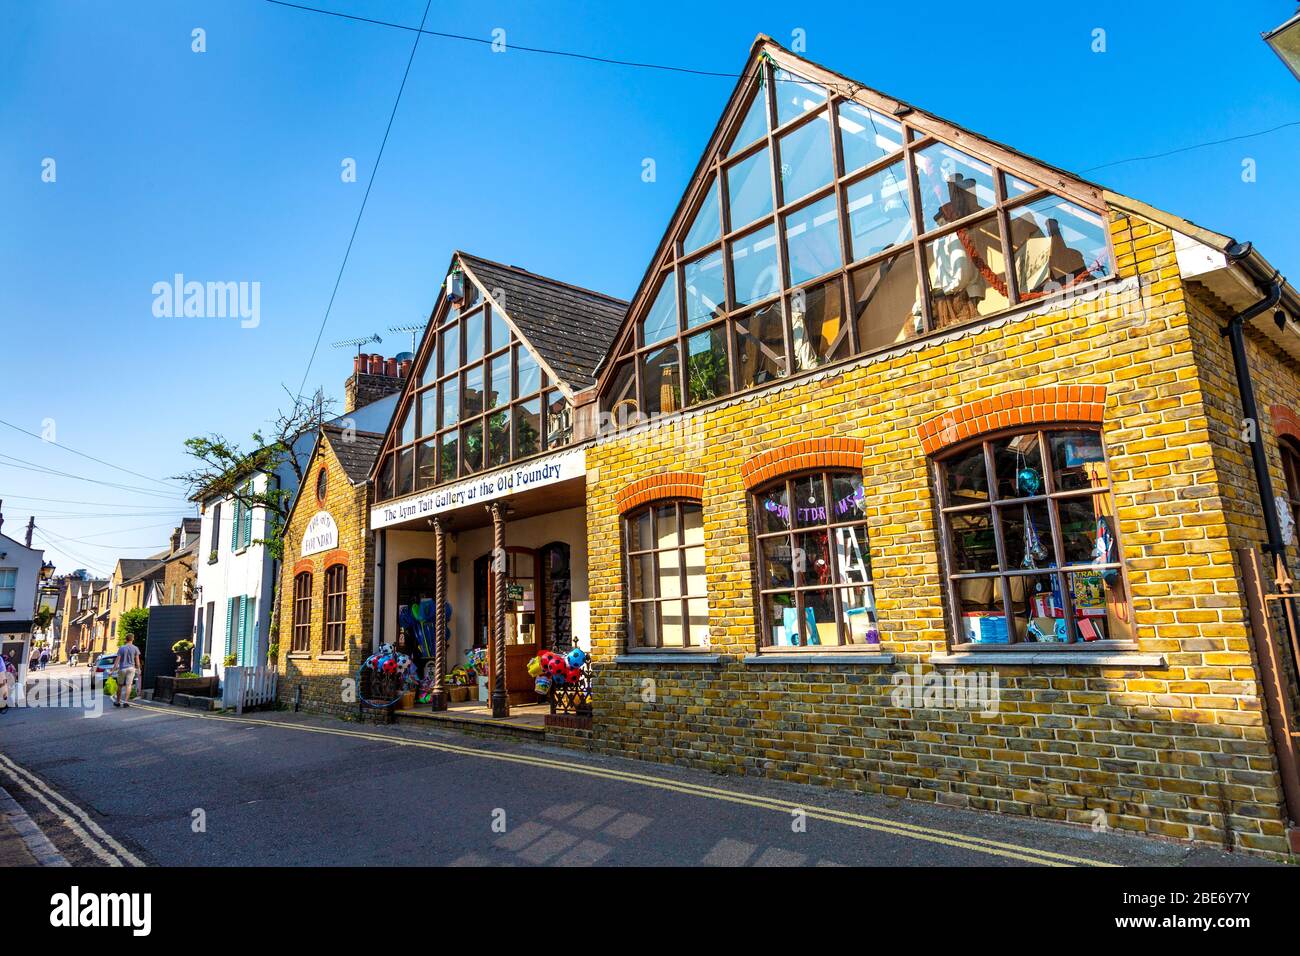 Exterior of The Lynn Tait Gallery at the Old Foundry, Leigh-on-Sea near Southend on Sea, Essex, UK Stock Photo